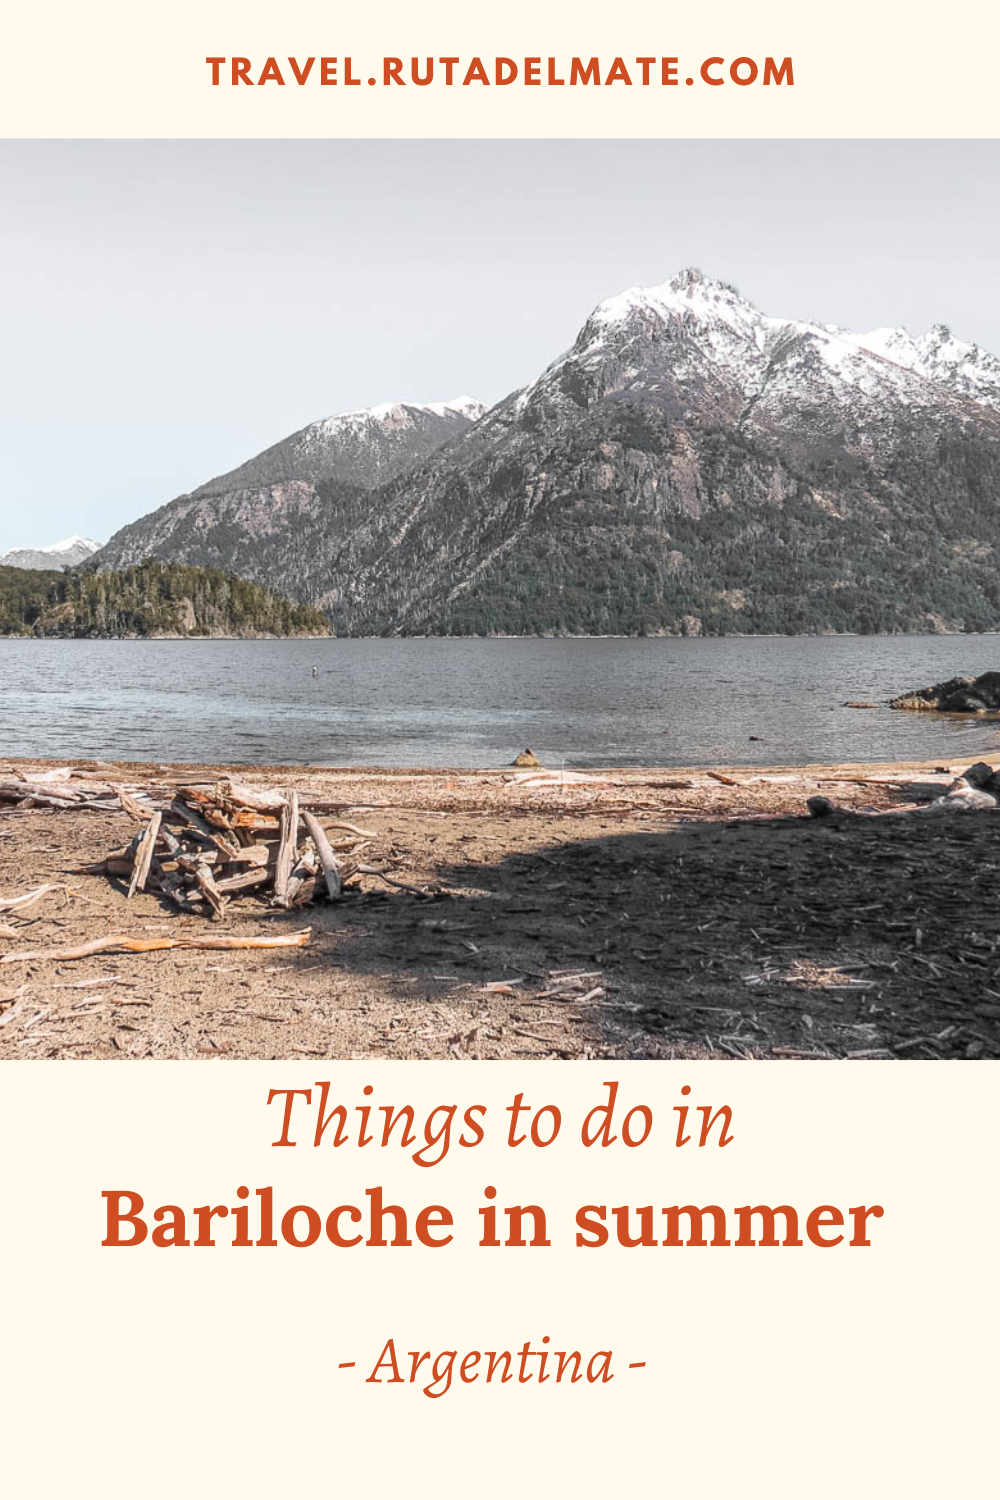 Things to do in Bariloche in summer